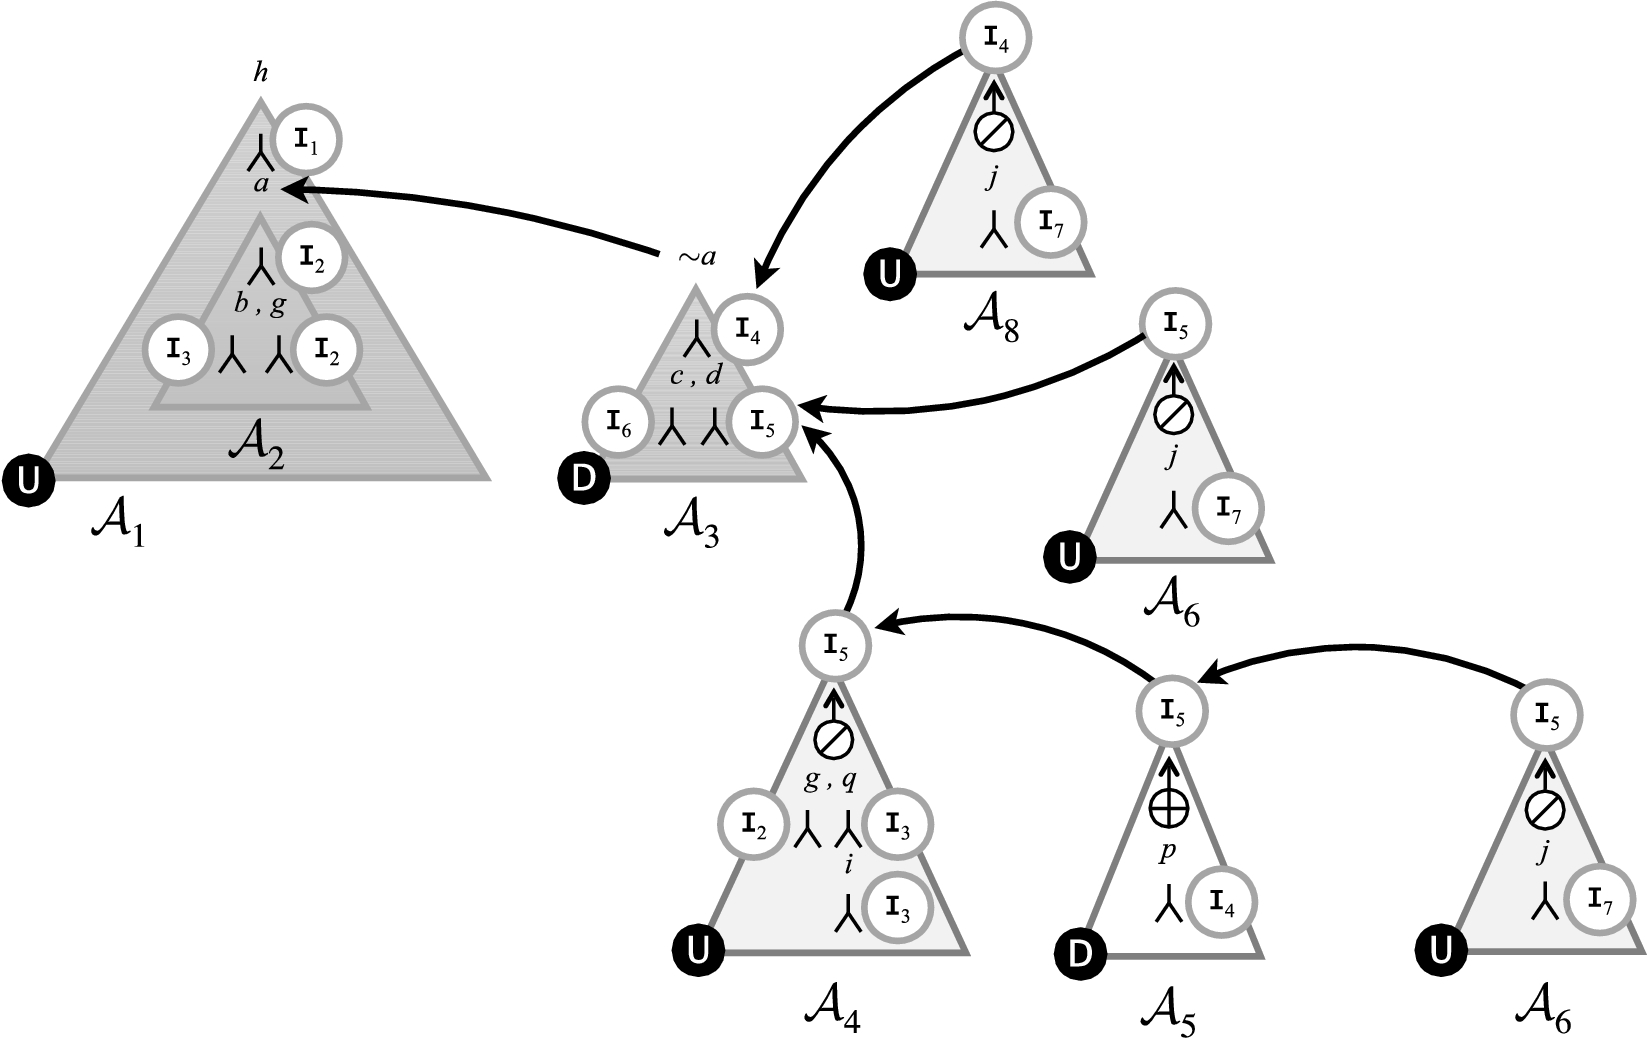 Marked dialectical tree T⟨A1,h⟩ from Example 11.